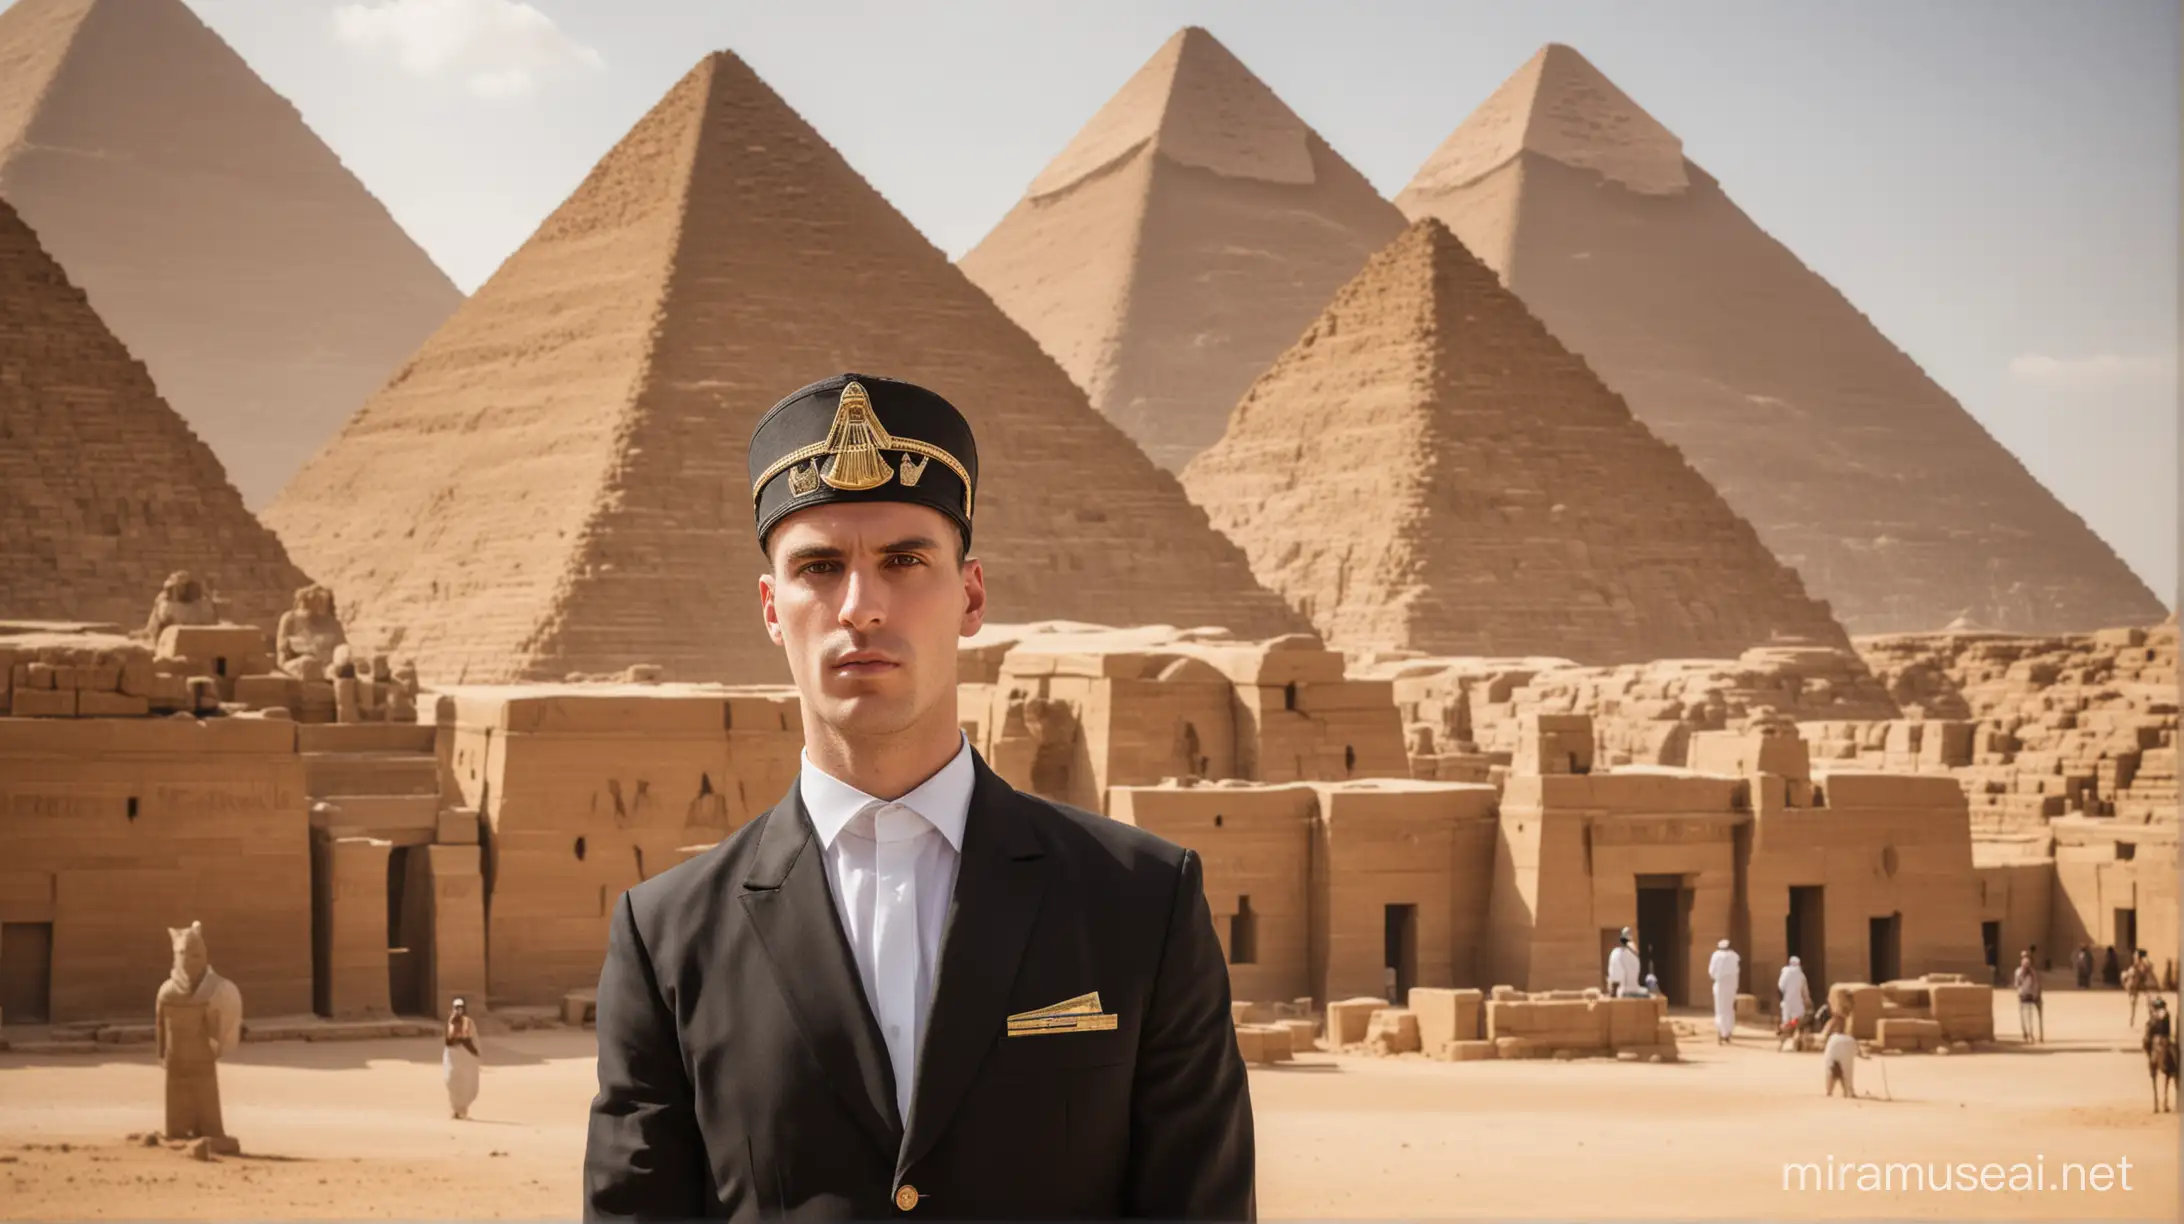 serious white security guard with black suit, wearing a pharoah hat standing in the background of ancient eygpt with pyramids